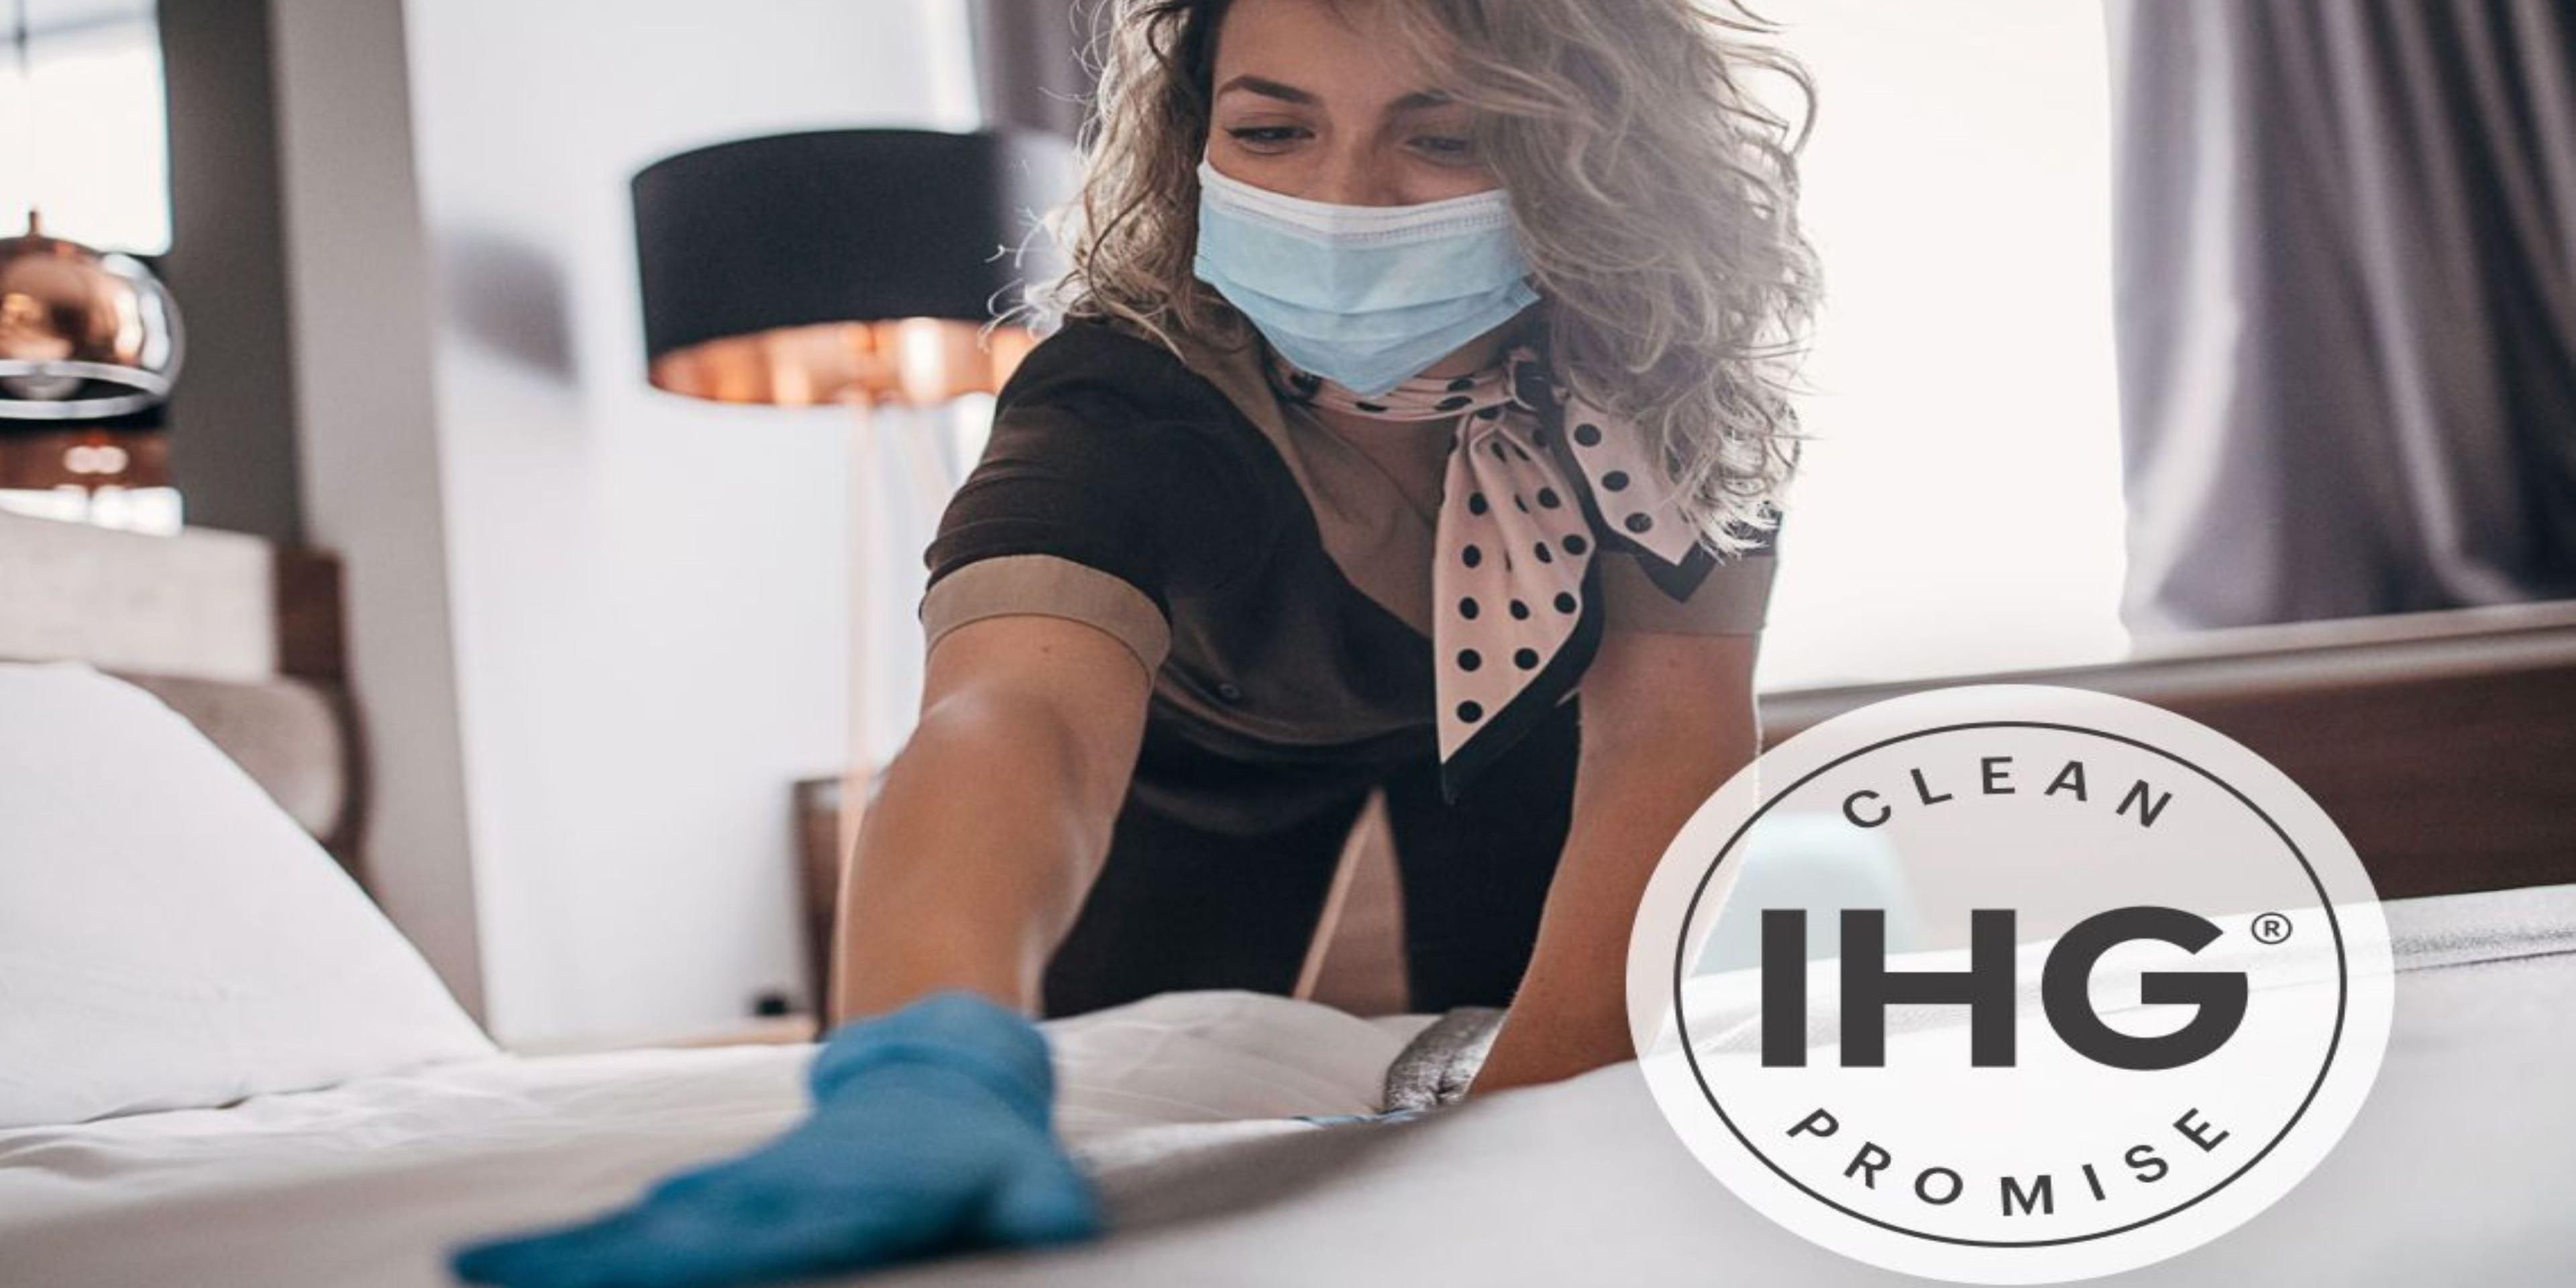 Travel with Peace of Mind. IHG Way of Clean is a robust, 360-degree cleanliness response program providing a comprehensive set of tools, training and equipment to ensure your safety. Join us in wishing that 2021 is a year of Health, Happiness, and HOPE!